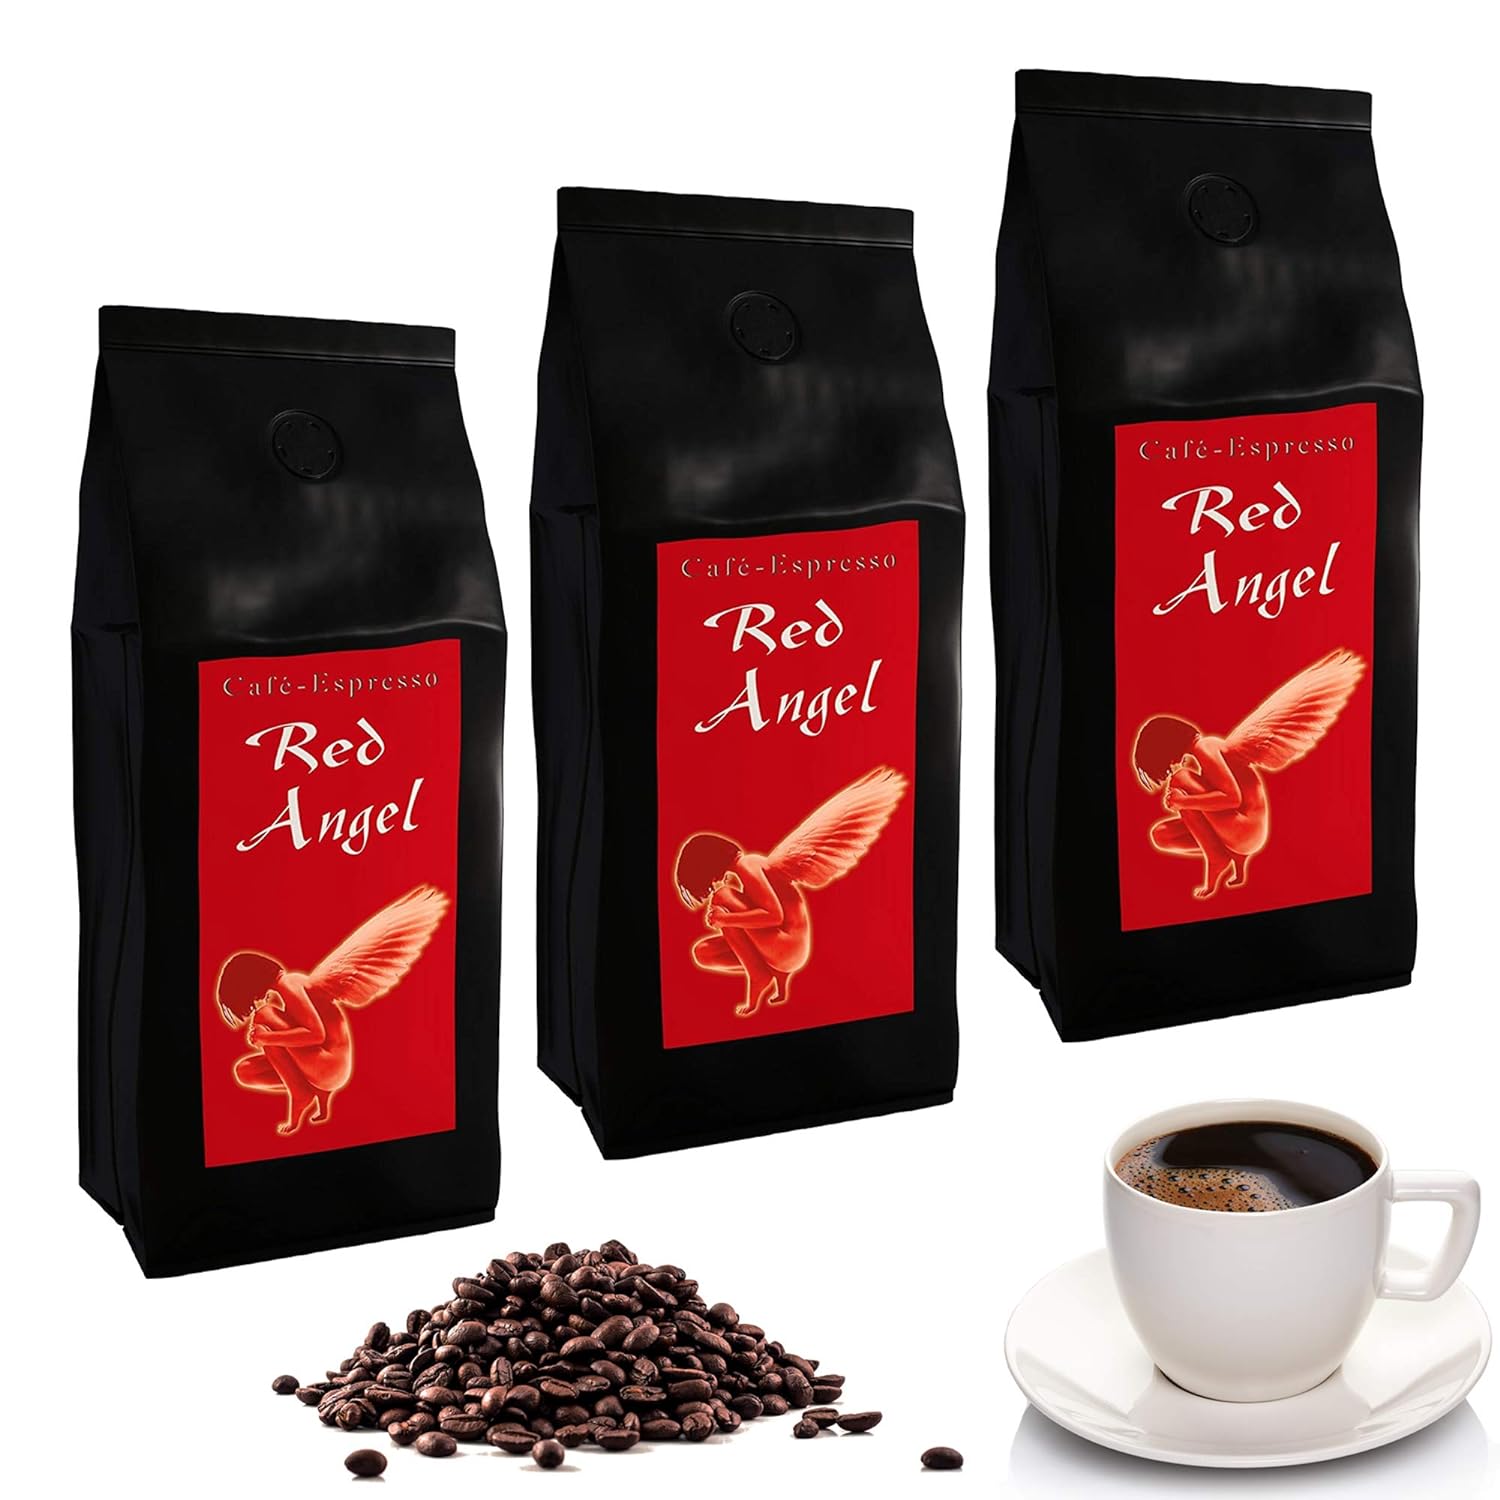 C&T Red Angel Espresso Deluxe 3 x 1000 g Whole coffee beans - the fiery - very strong top coffee from our popular espresso angel series